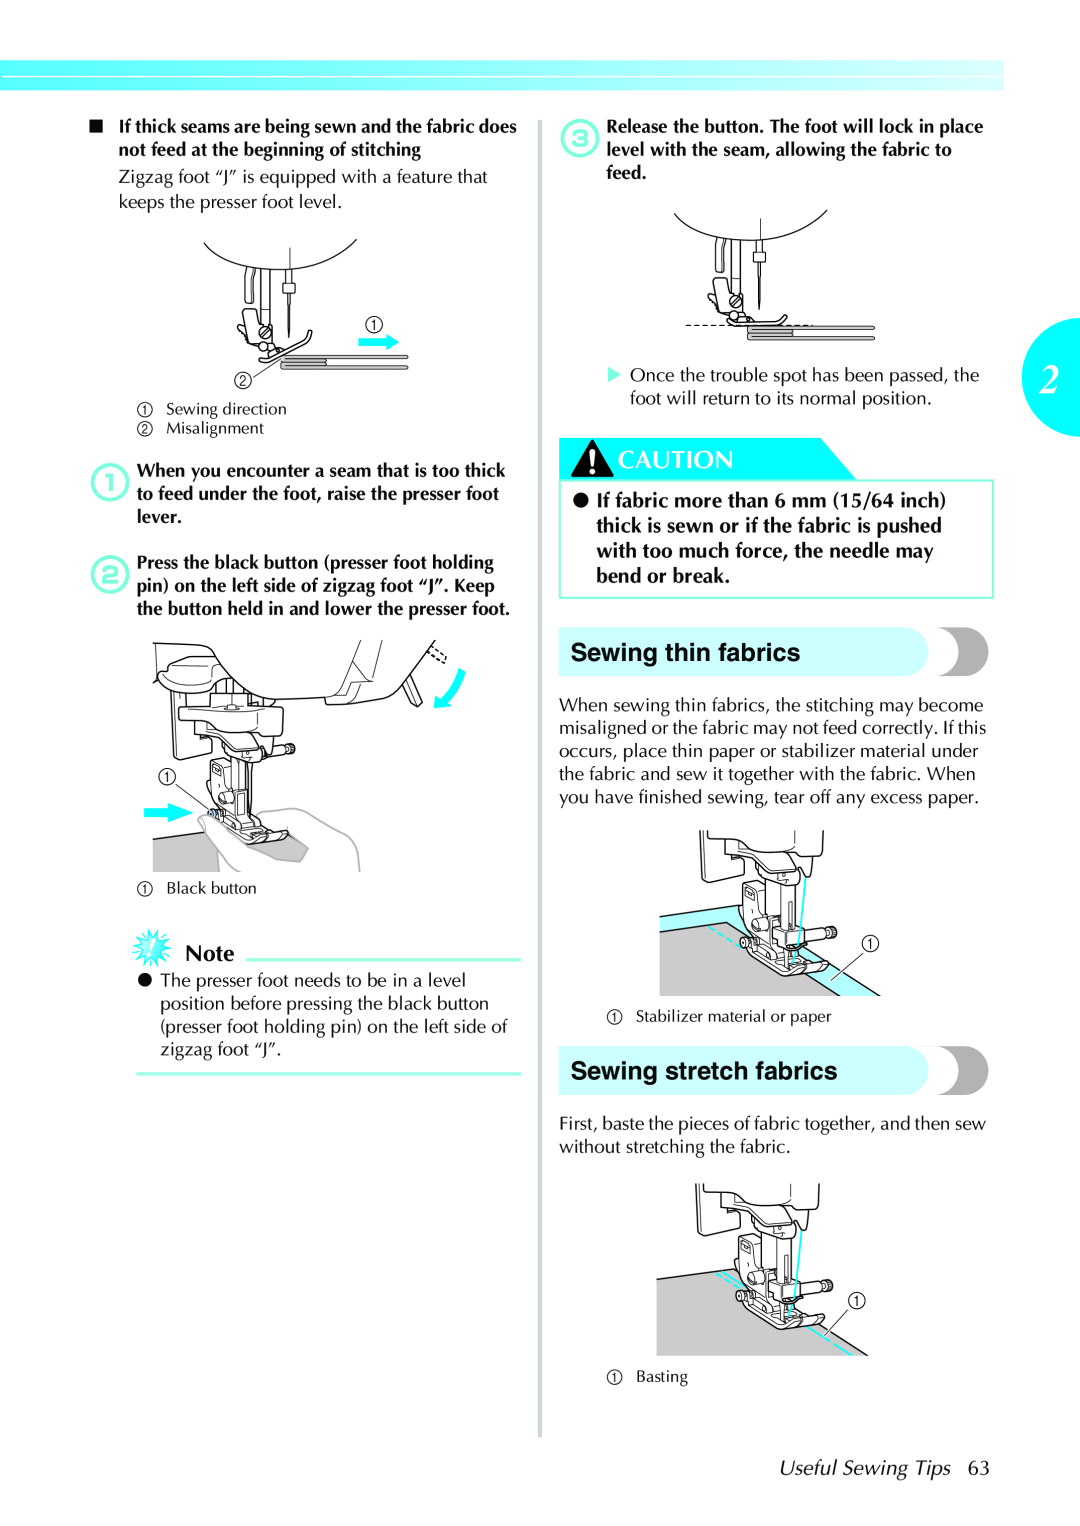 Brother Sewing Machines operation manual Sewing thin fabrics, Sewing stretch fabrics, Useful Sewing Tips 